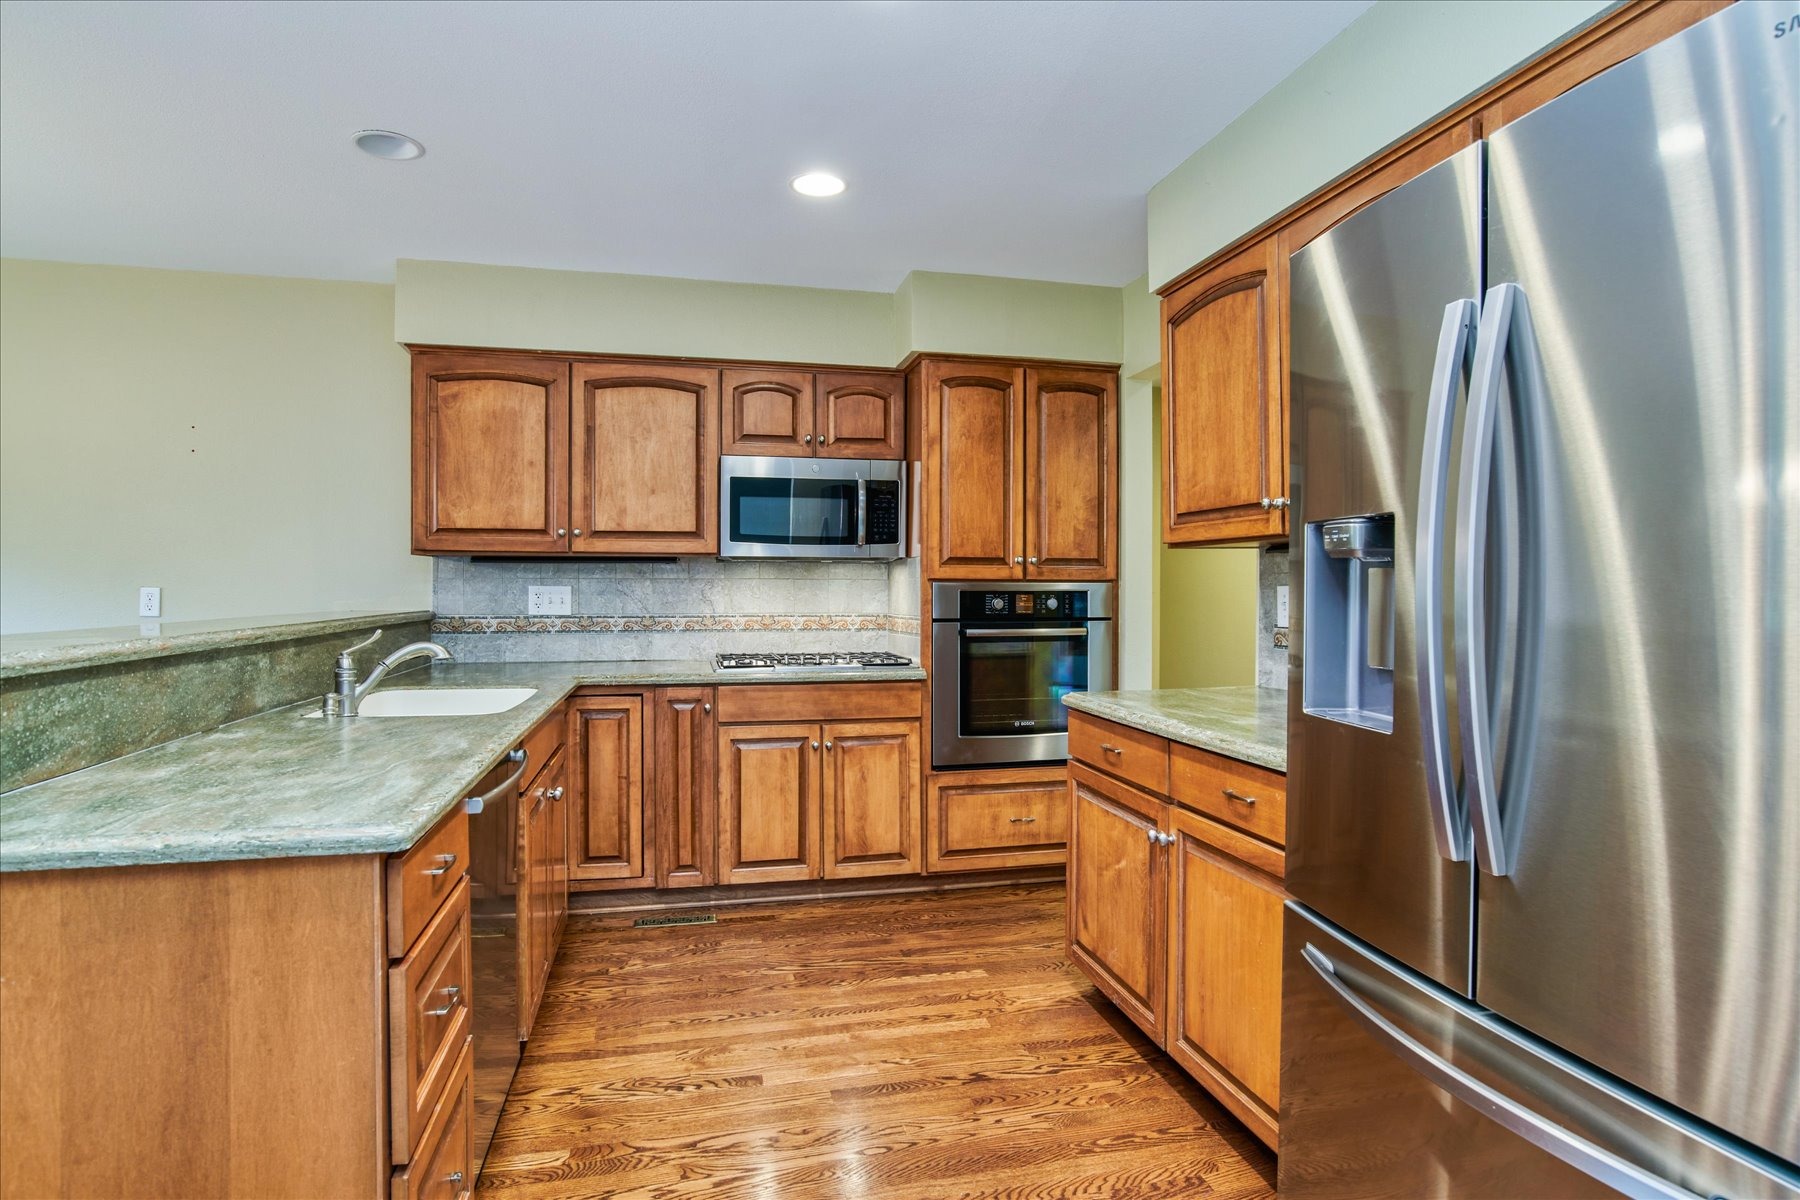 Remodeled Kitchen with Stainless Appliances